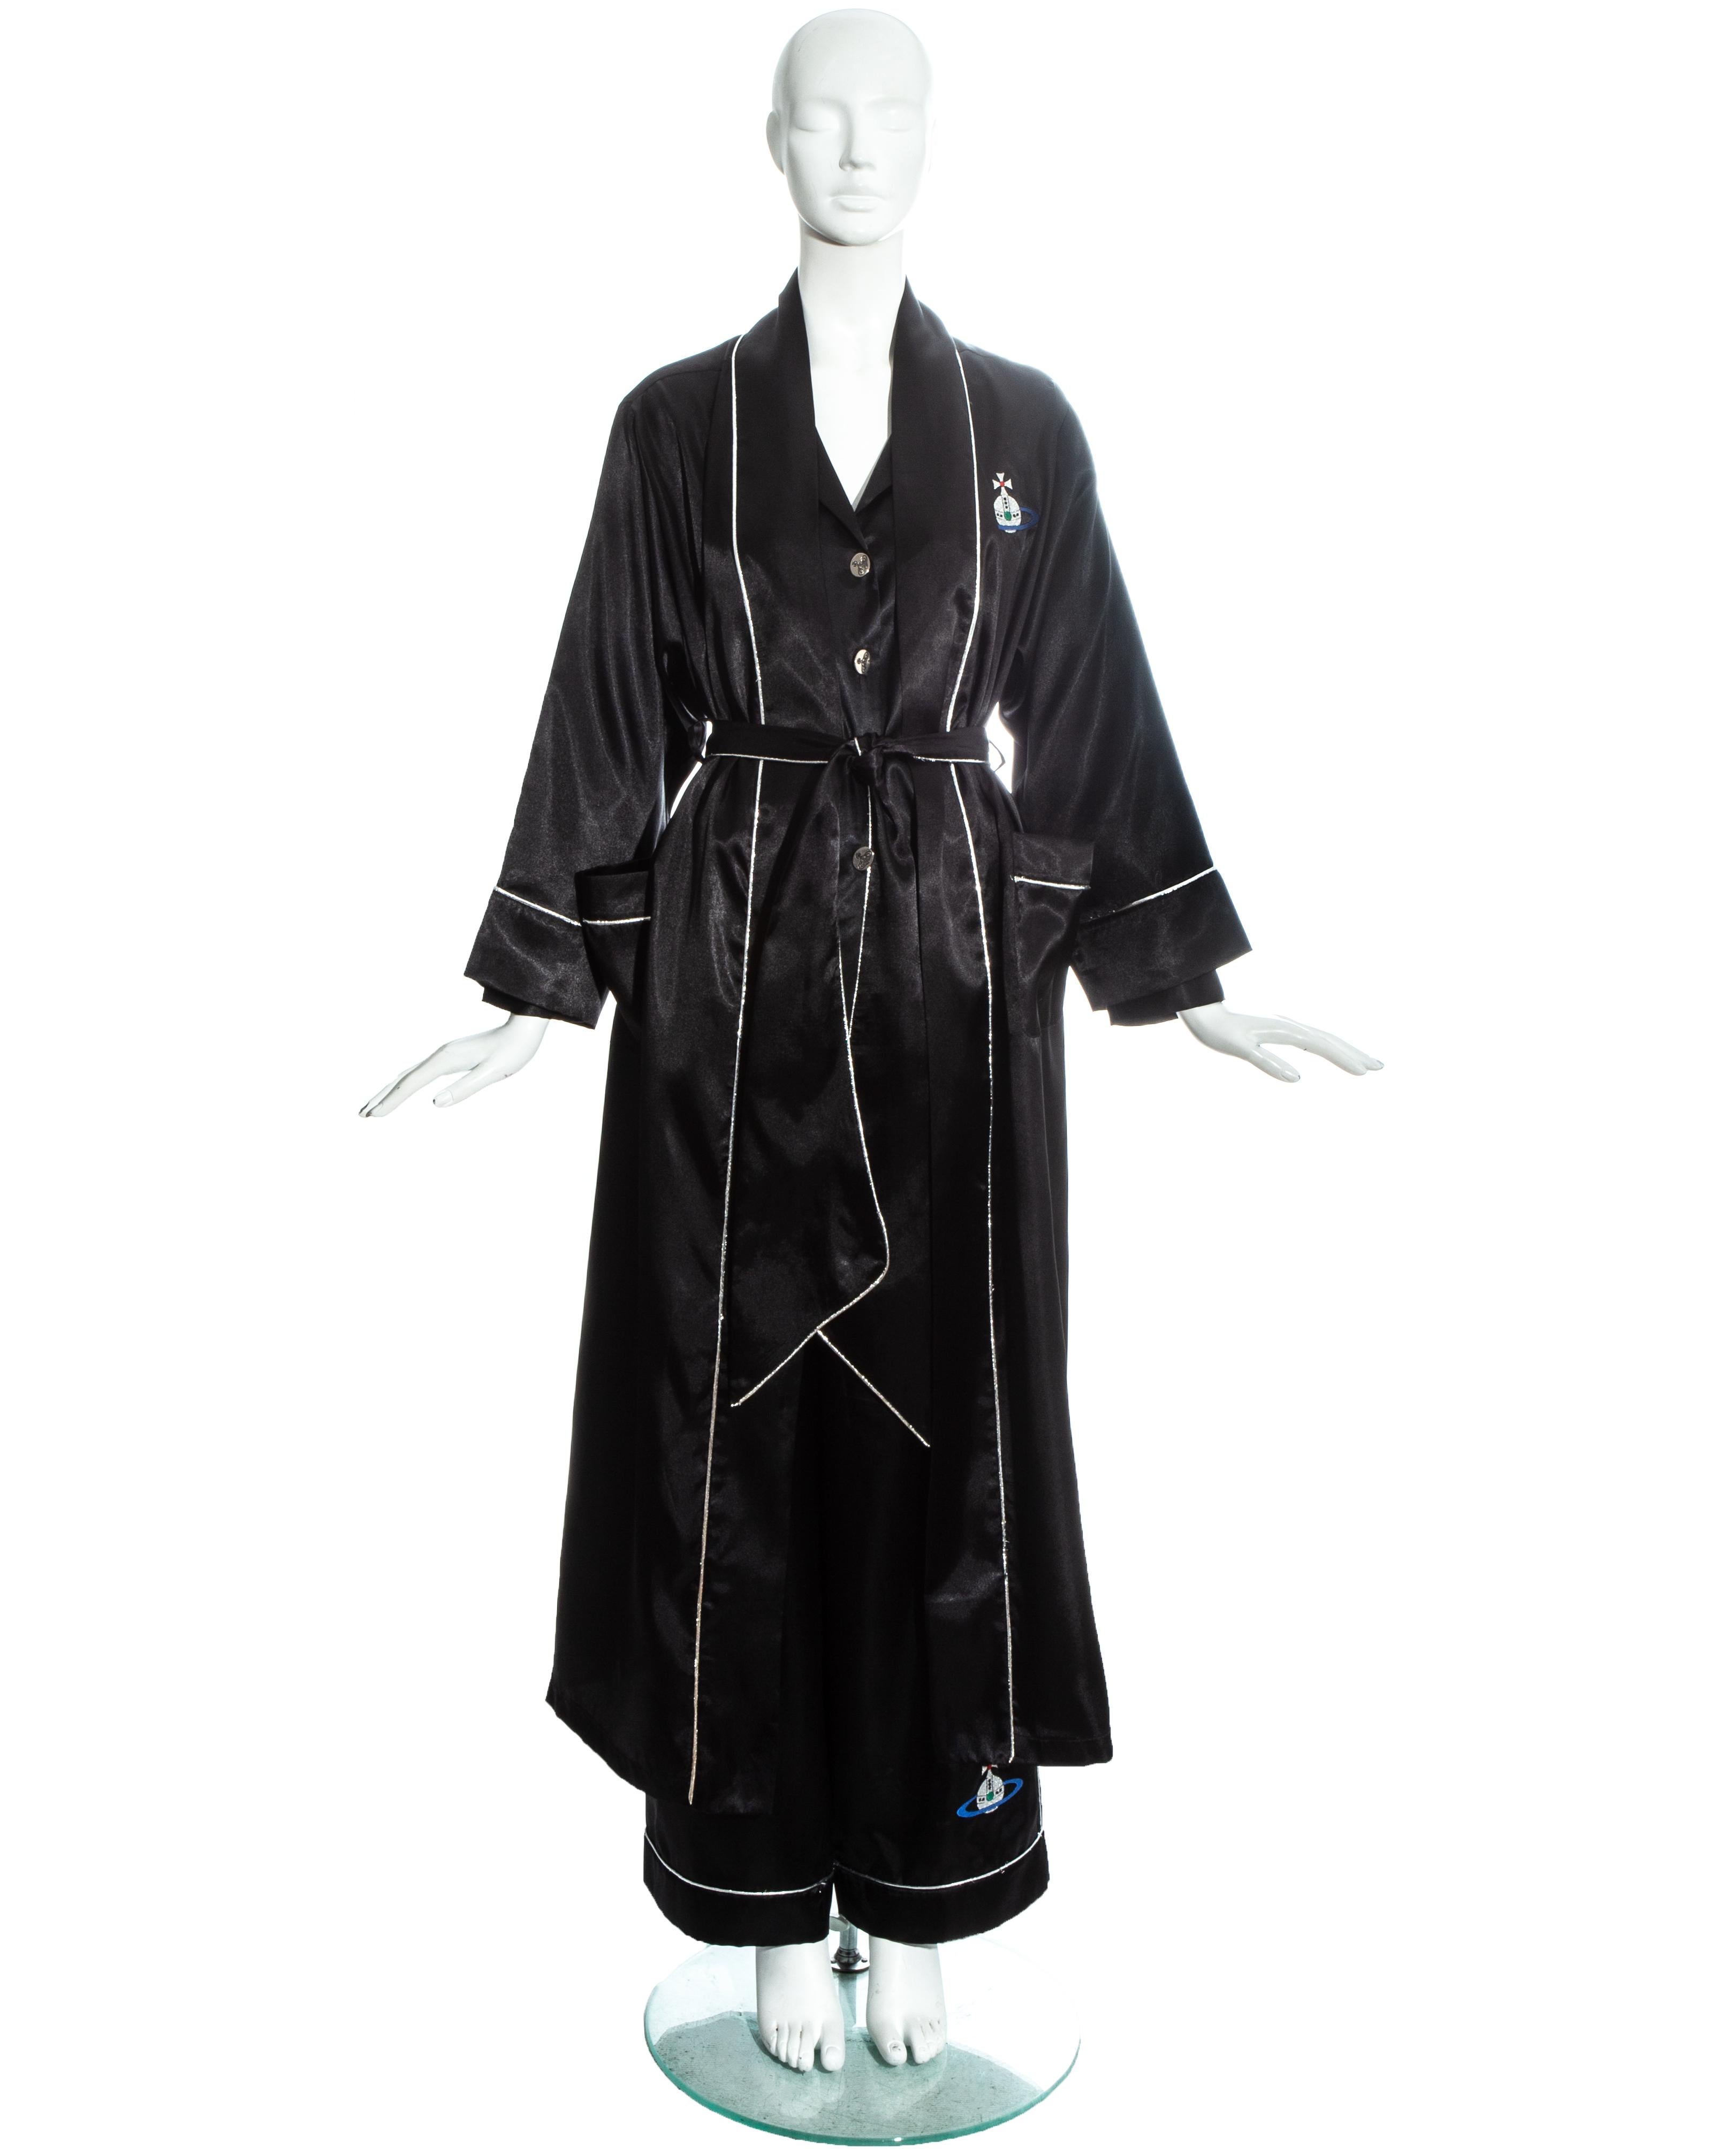 Vivienne Westwood black polyester 3 piece pyjama suit with three large embroidered orbs and silver lurex piping. Loose fit robe with matching belt and two front pockets, loose fit blouse with silver metal orb button closures and wide leg pants with